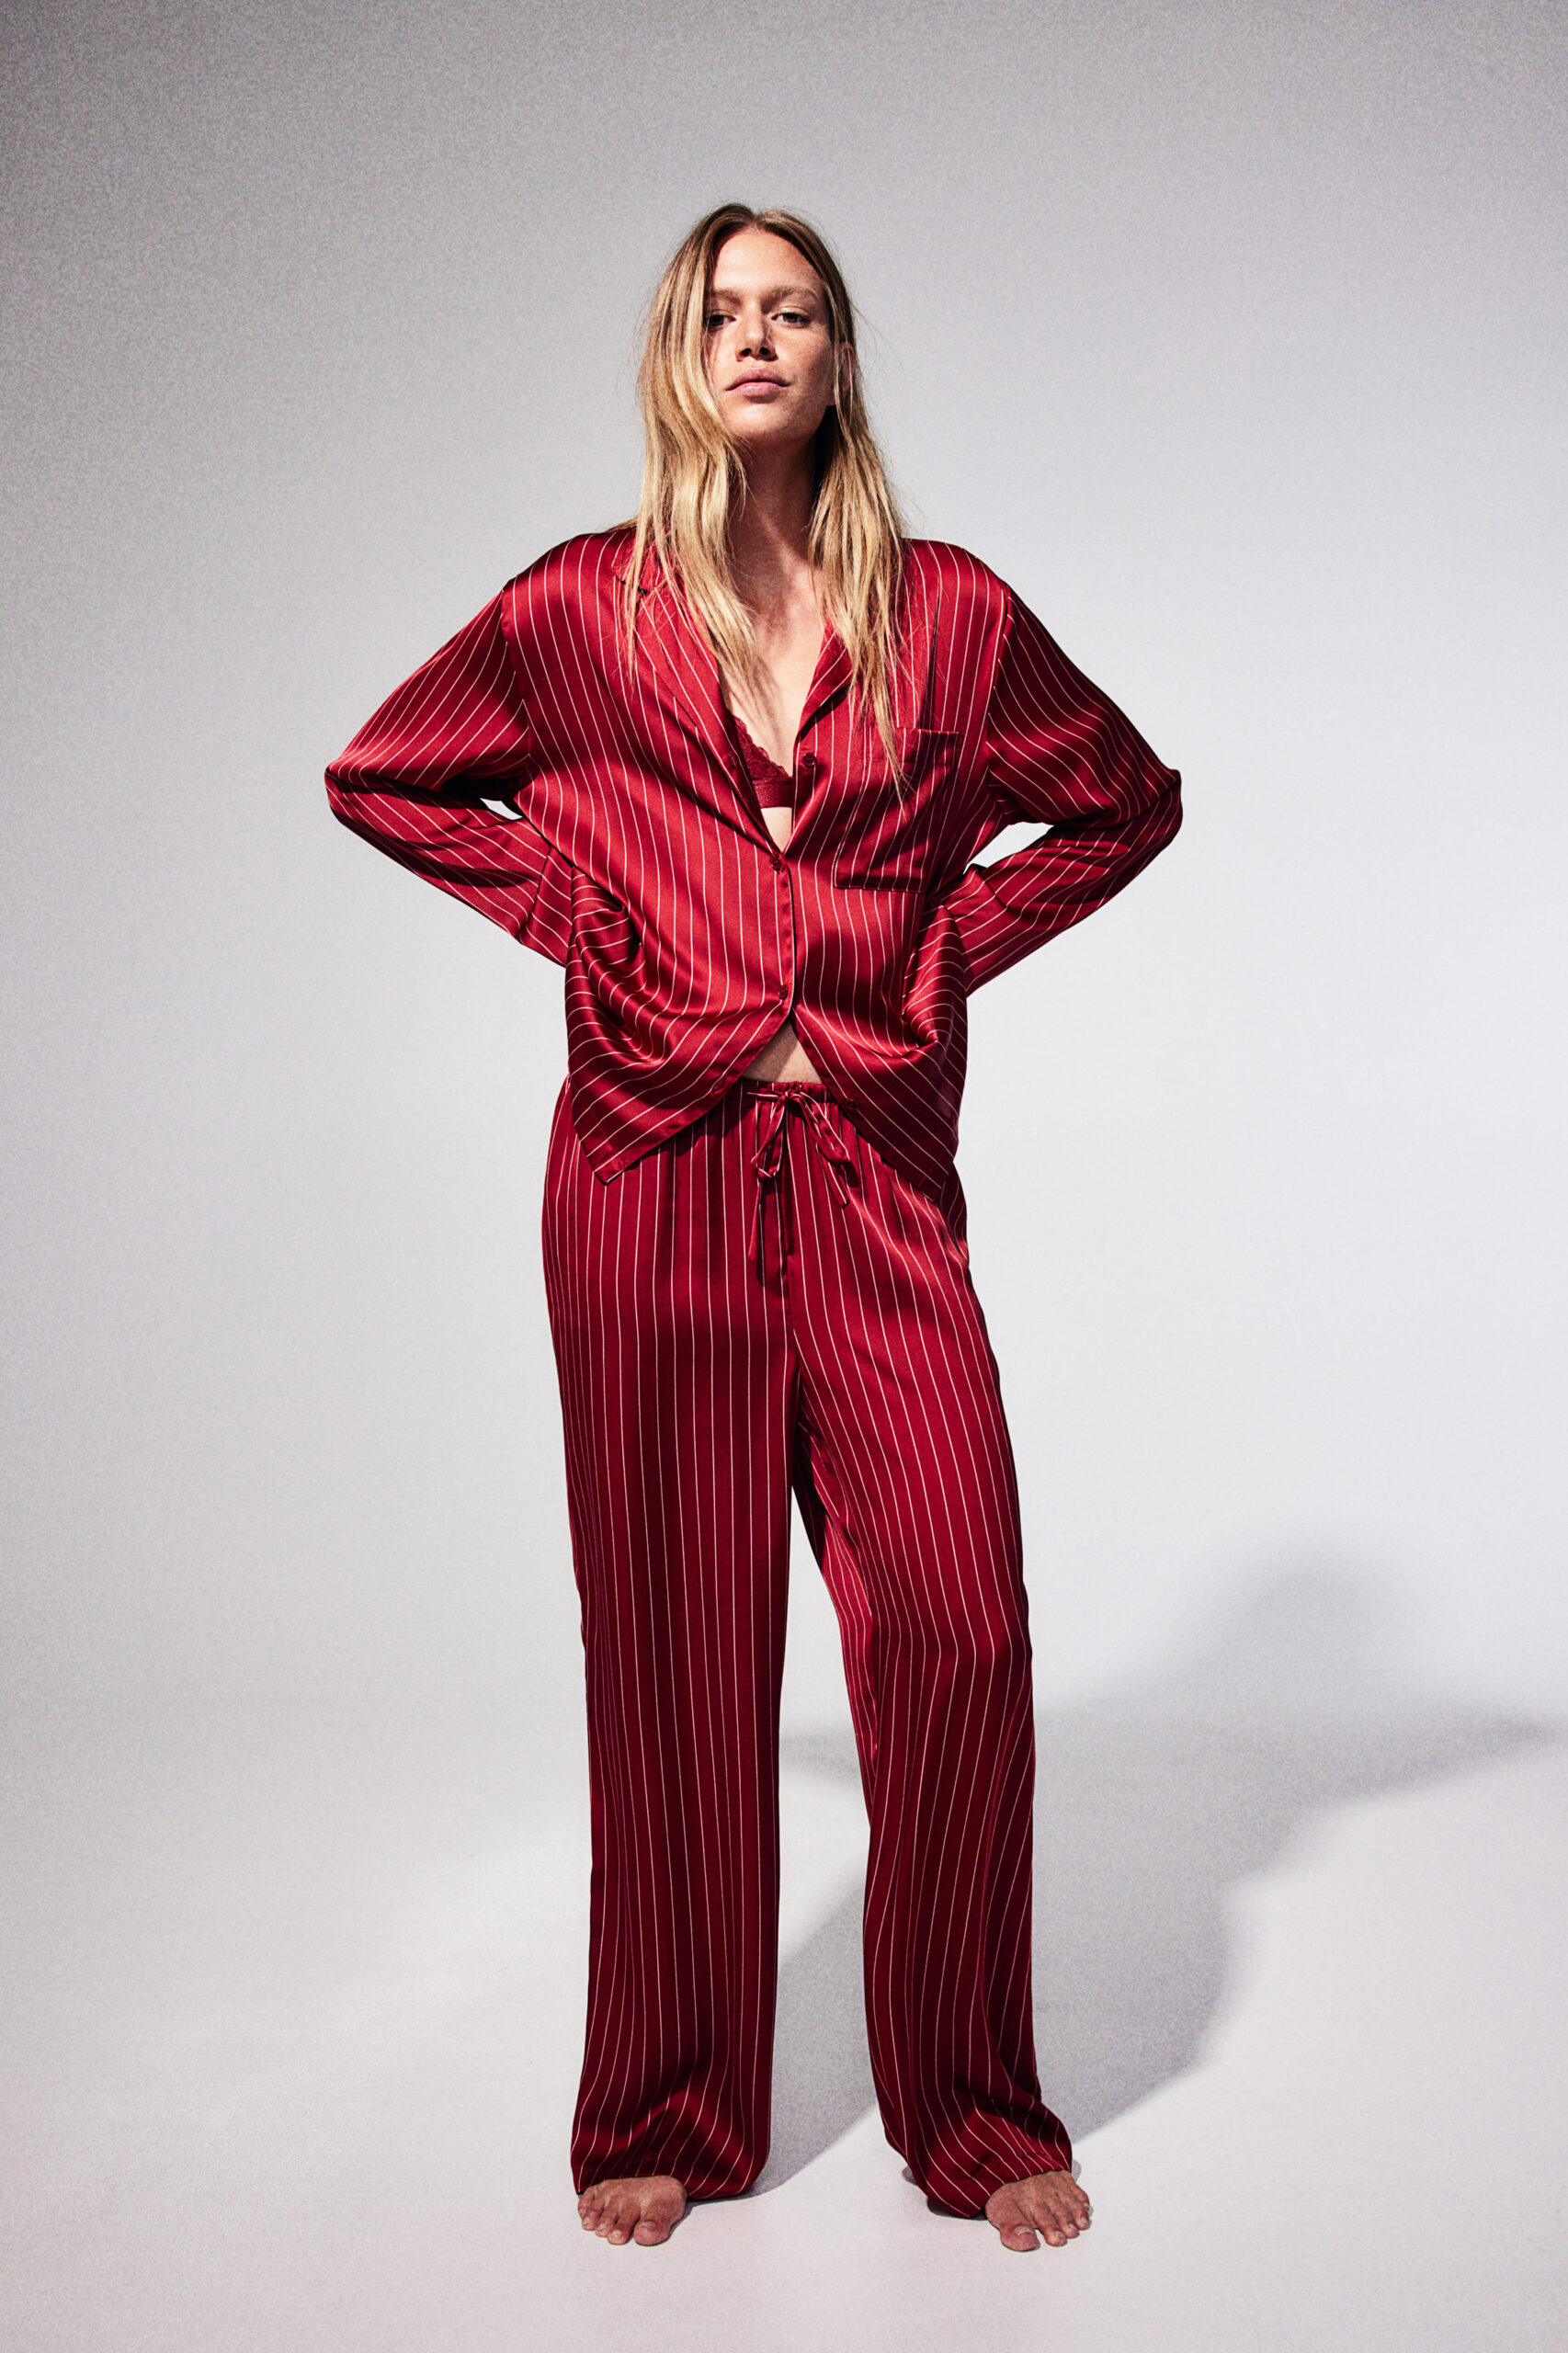 woman in red and white striped satin pajamas